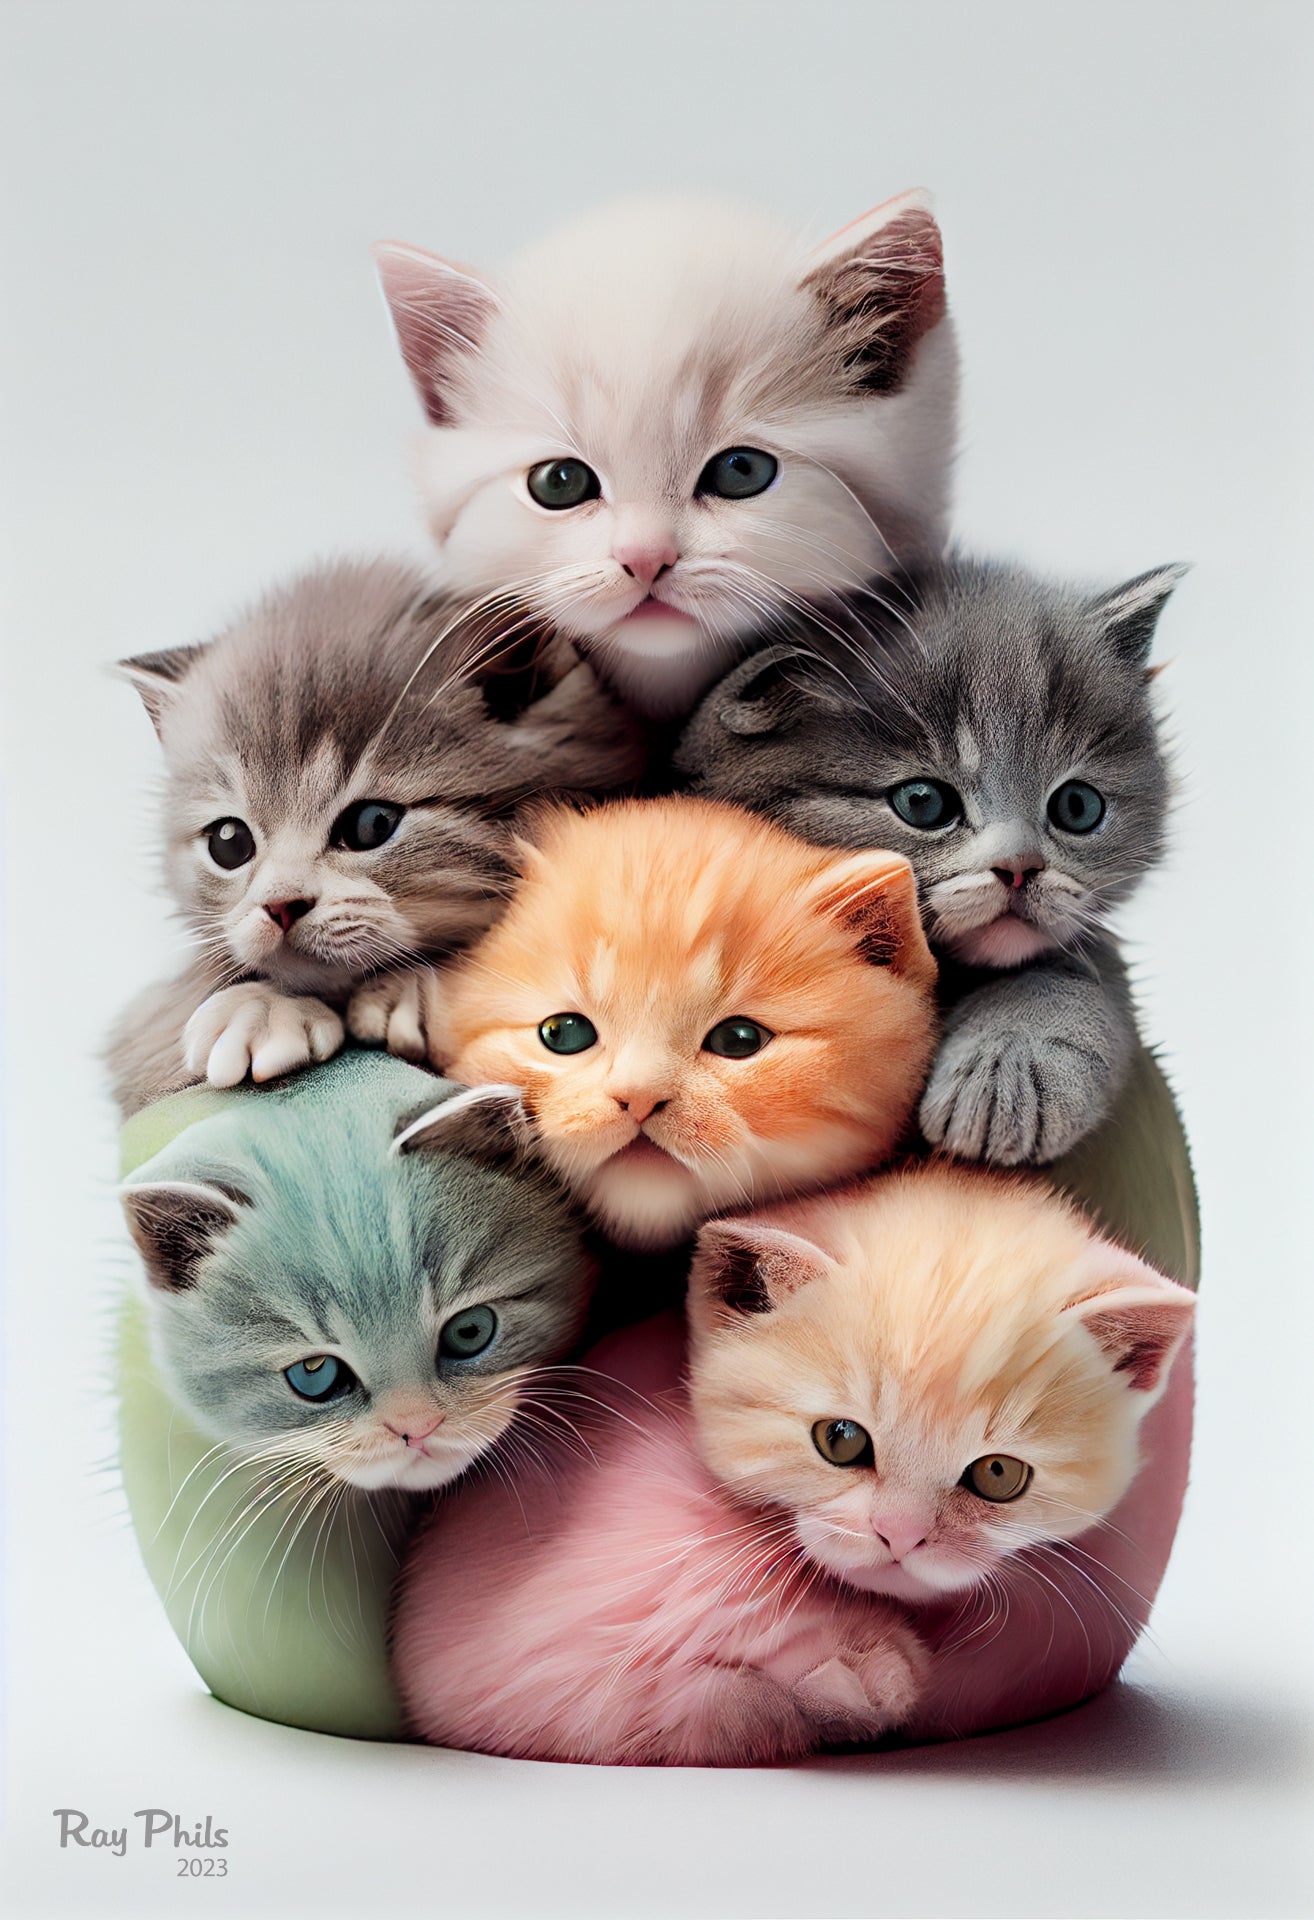 Stacked animals: Cats II